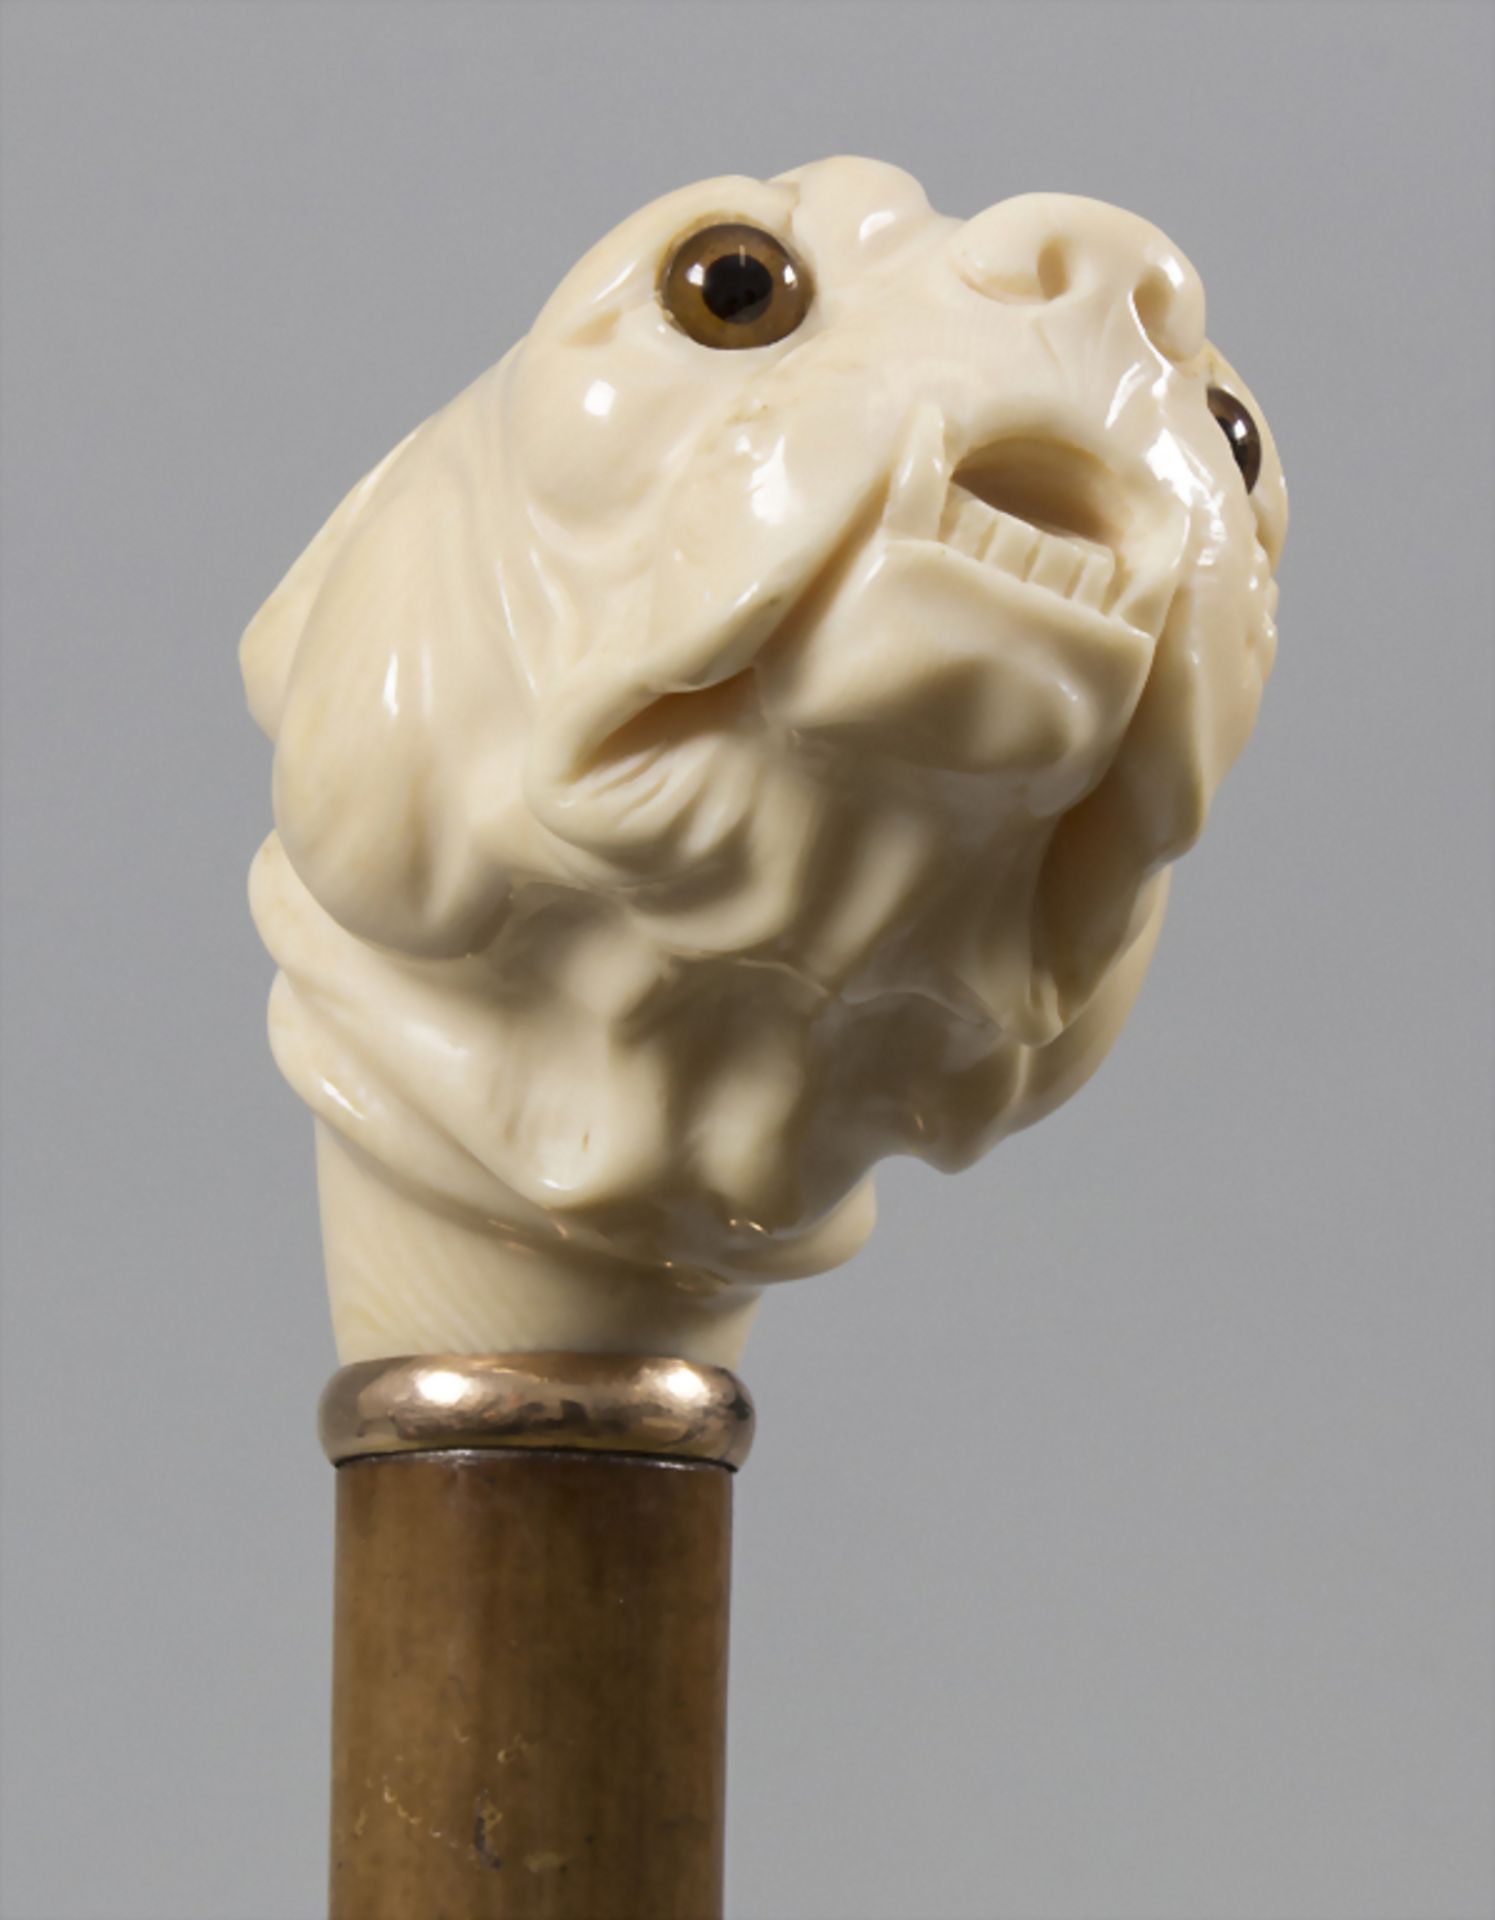 Spazierstock mit Bulldoggenkopf-Griff / A walking stick / cane with a bulldog's head shaped hilt - Image 4 of 5